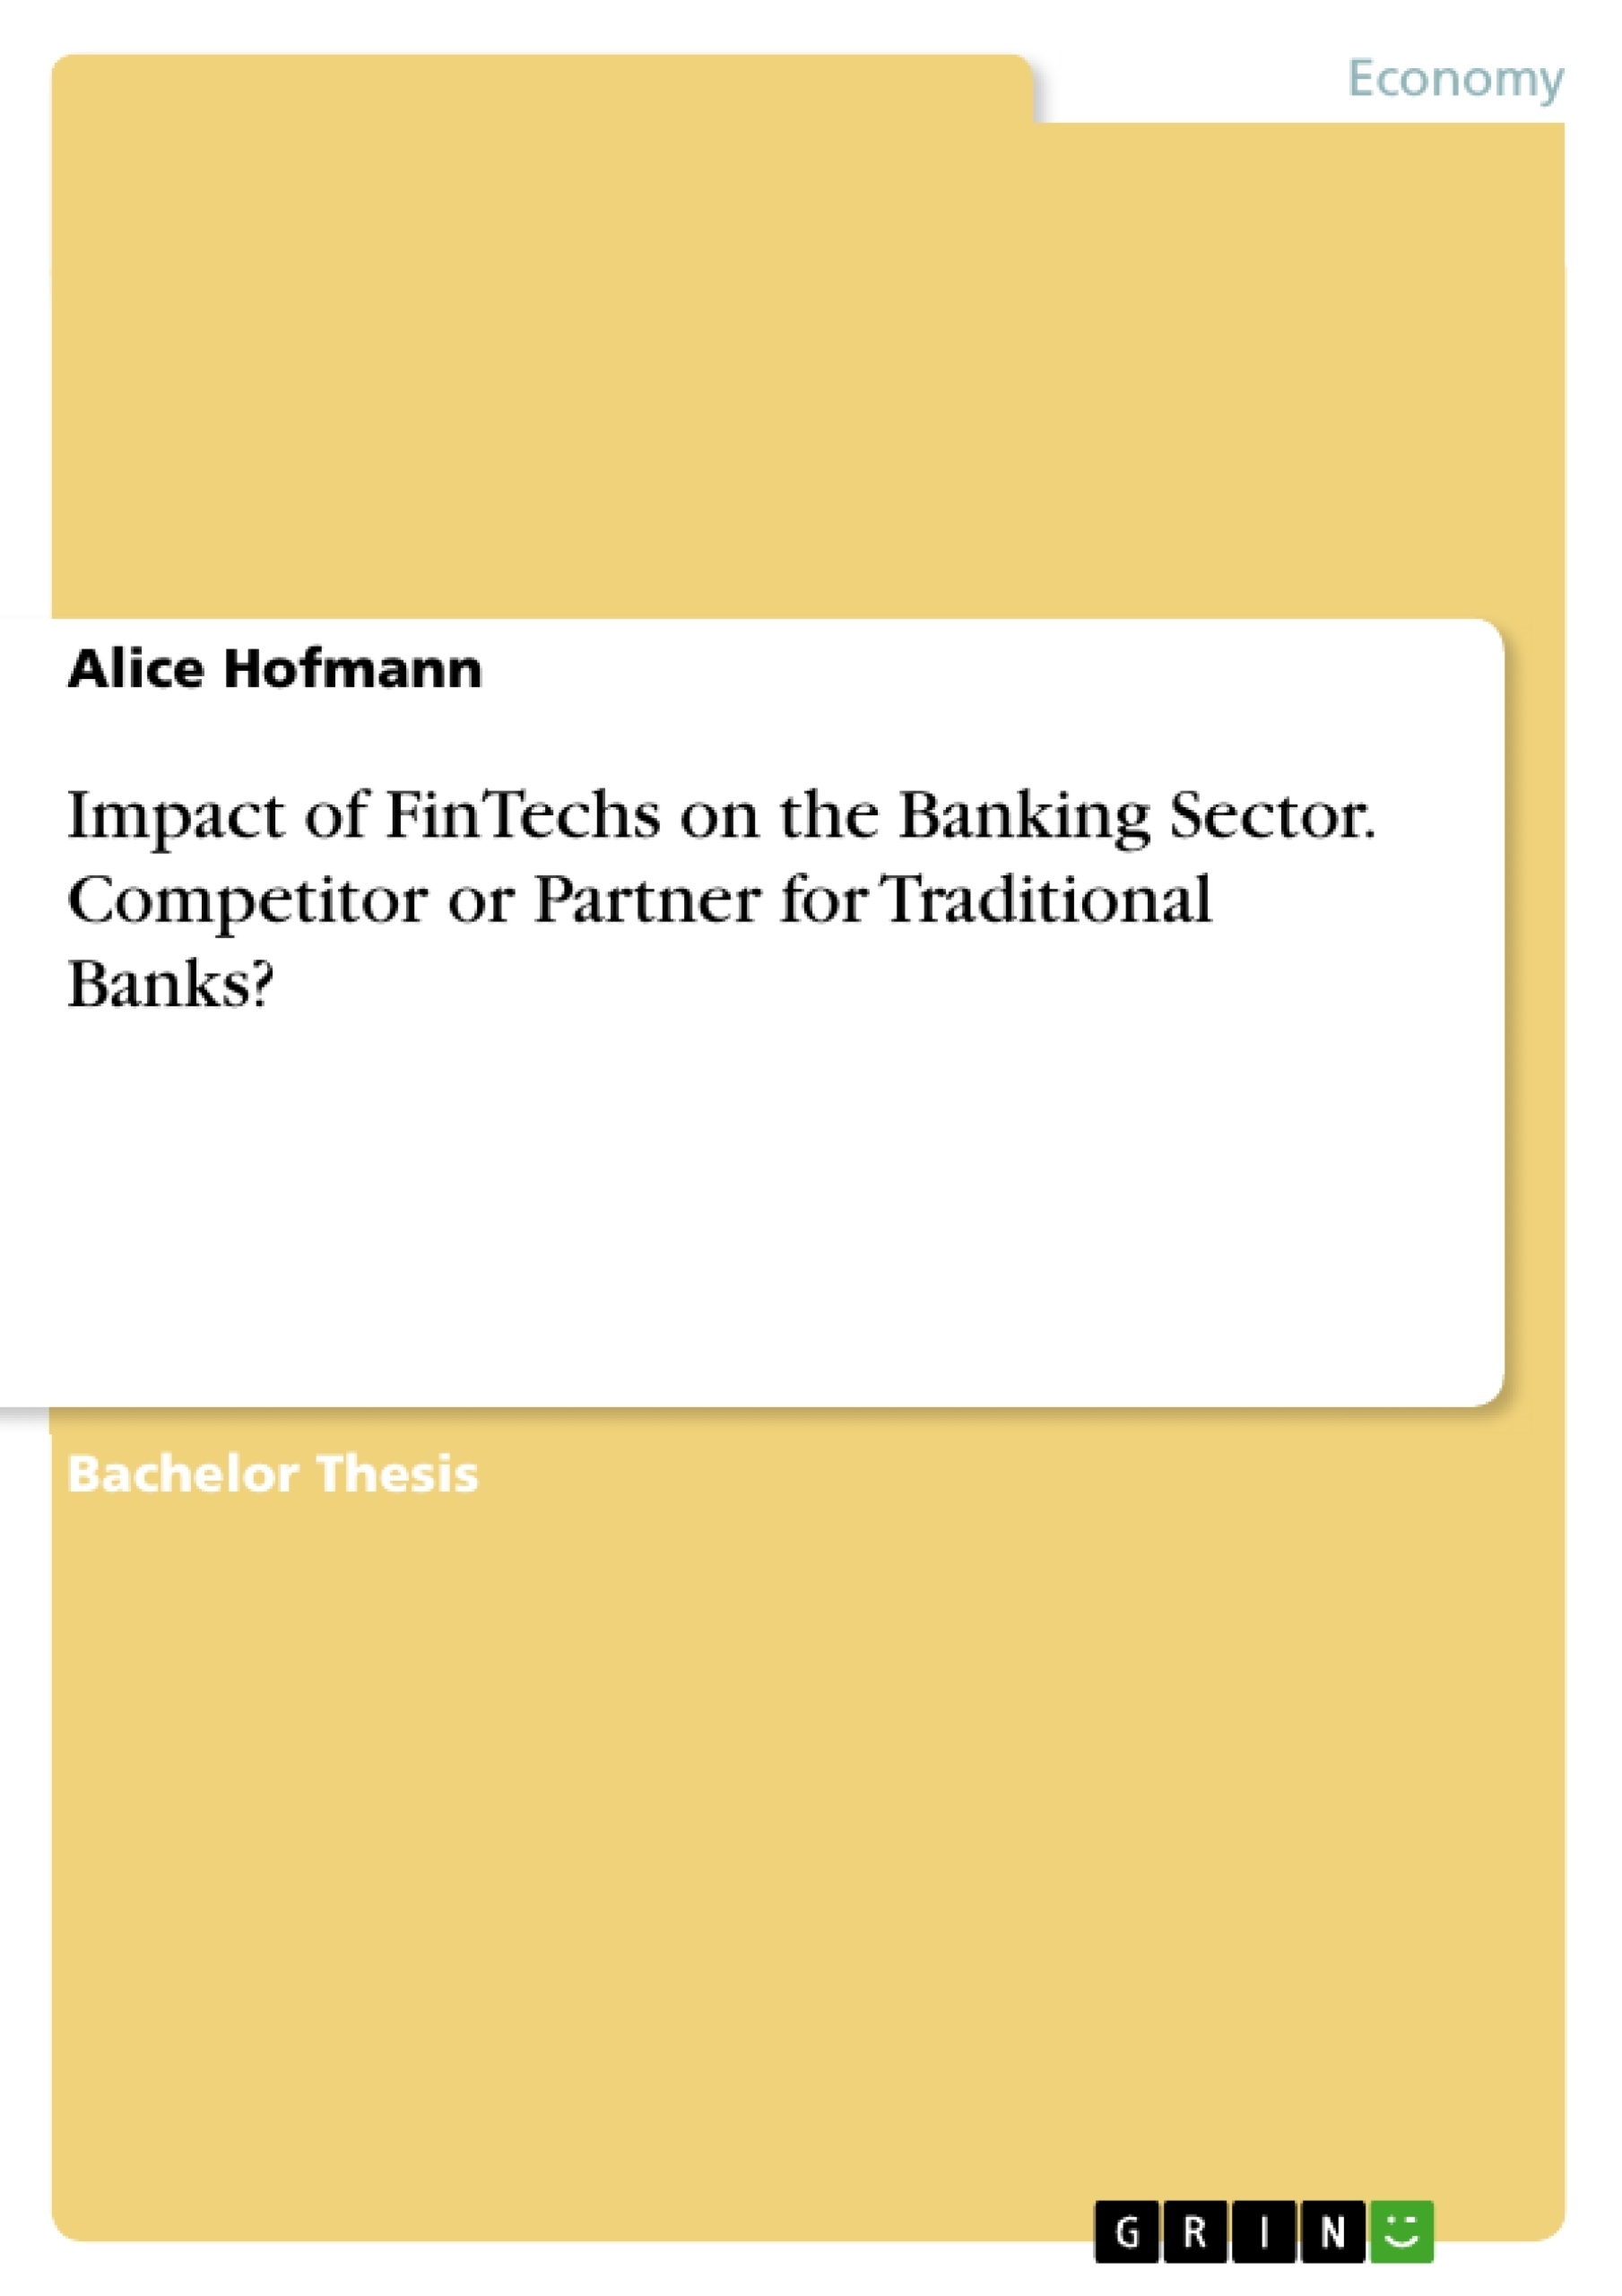 Title: Impact of FinTechs on the Banking Sector. Competitor or Partner for Traditional Banks?